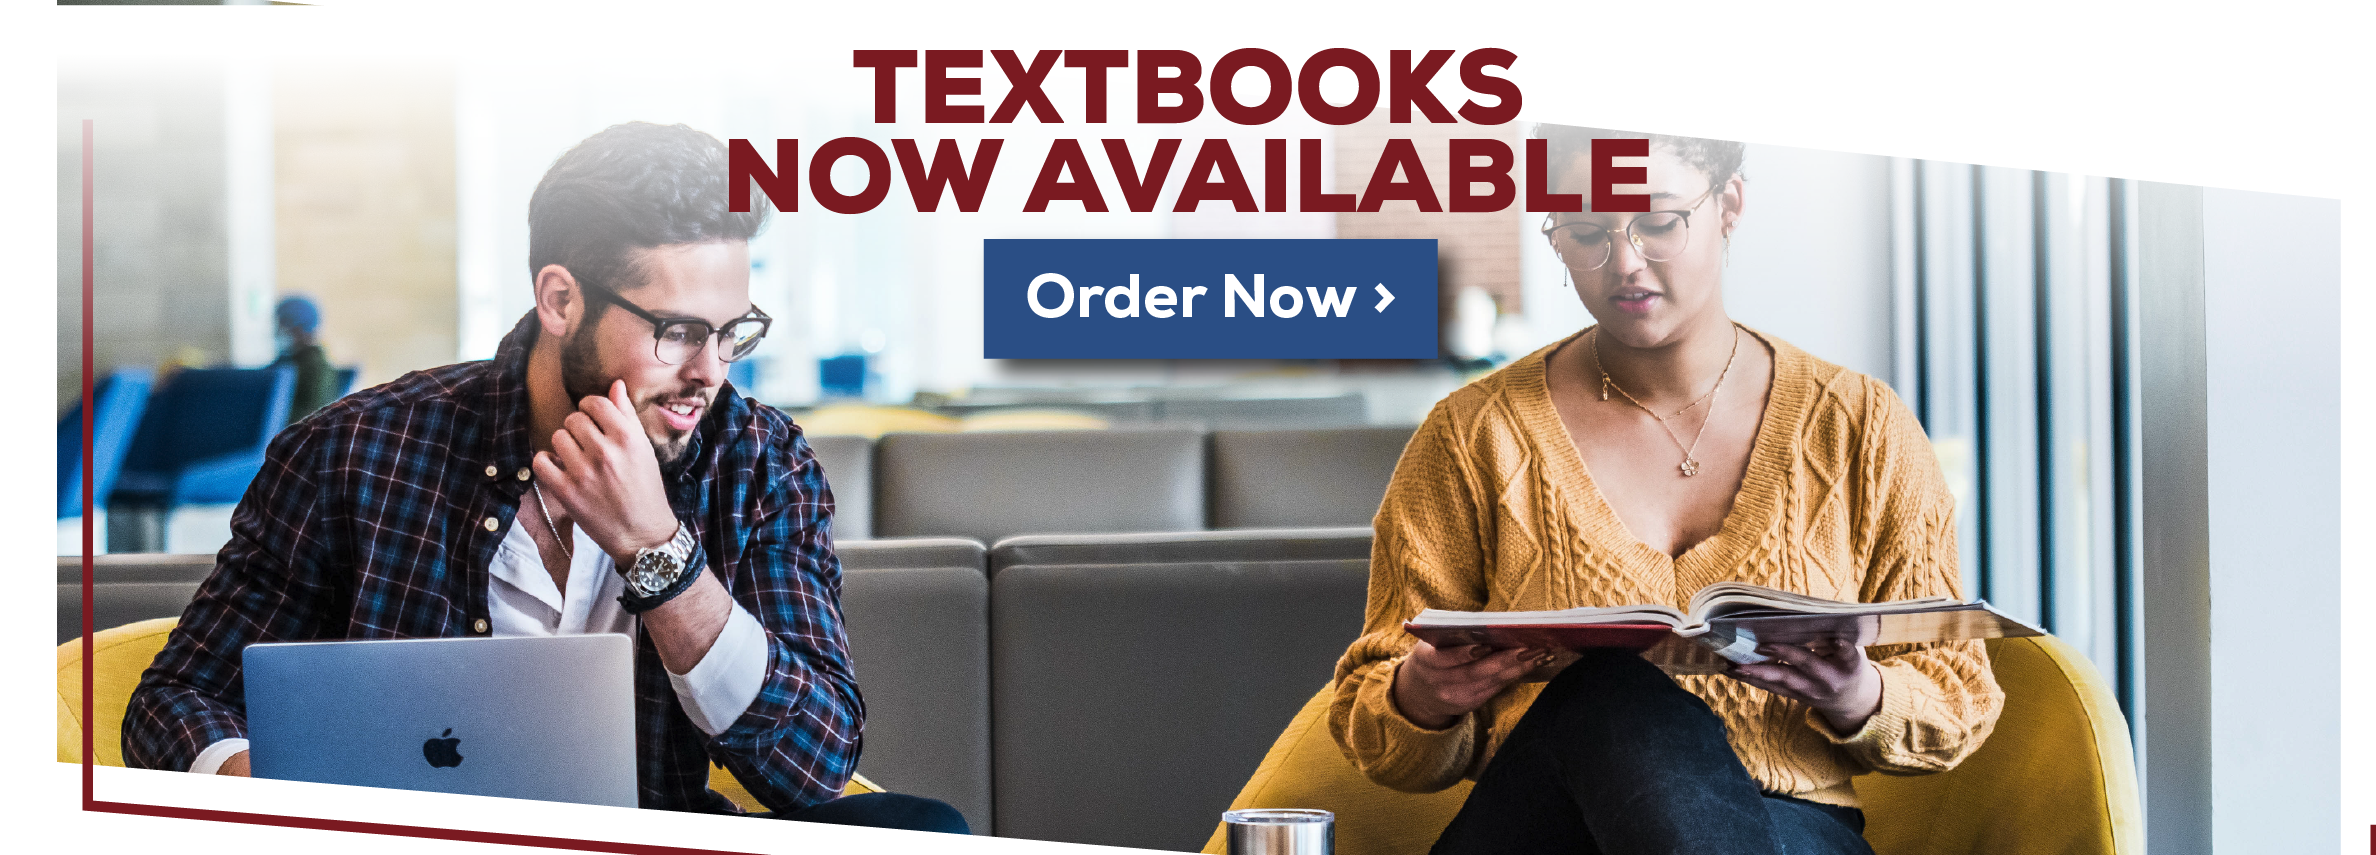 Textbooks Now Available. Order Now.